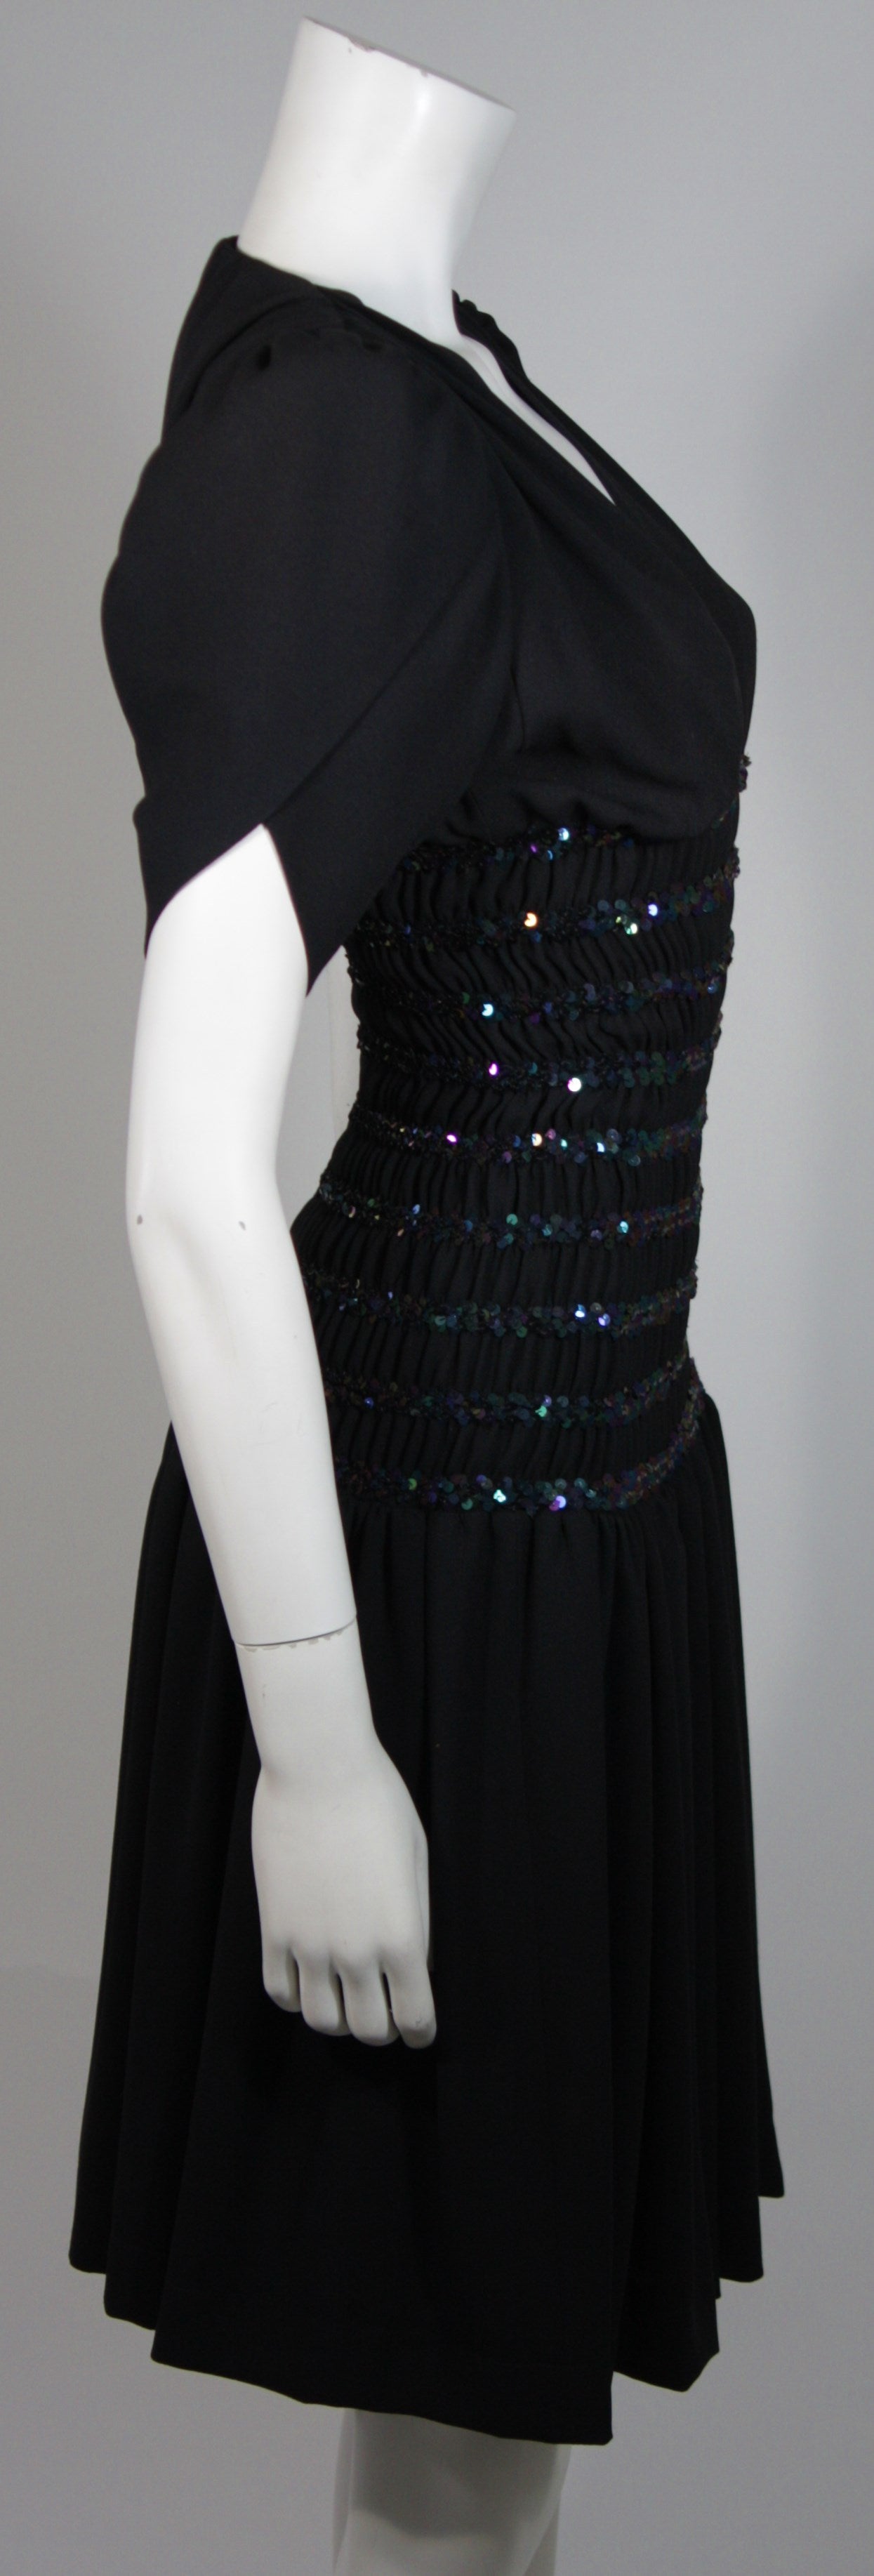 Yves Saint Laurent Black Cocktail Gown with Sequin Smocked Waist Size 38 For Sale 2